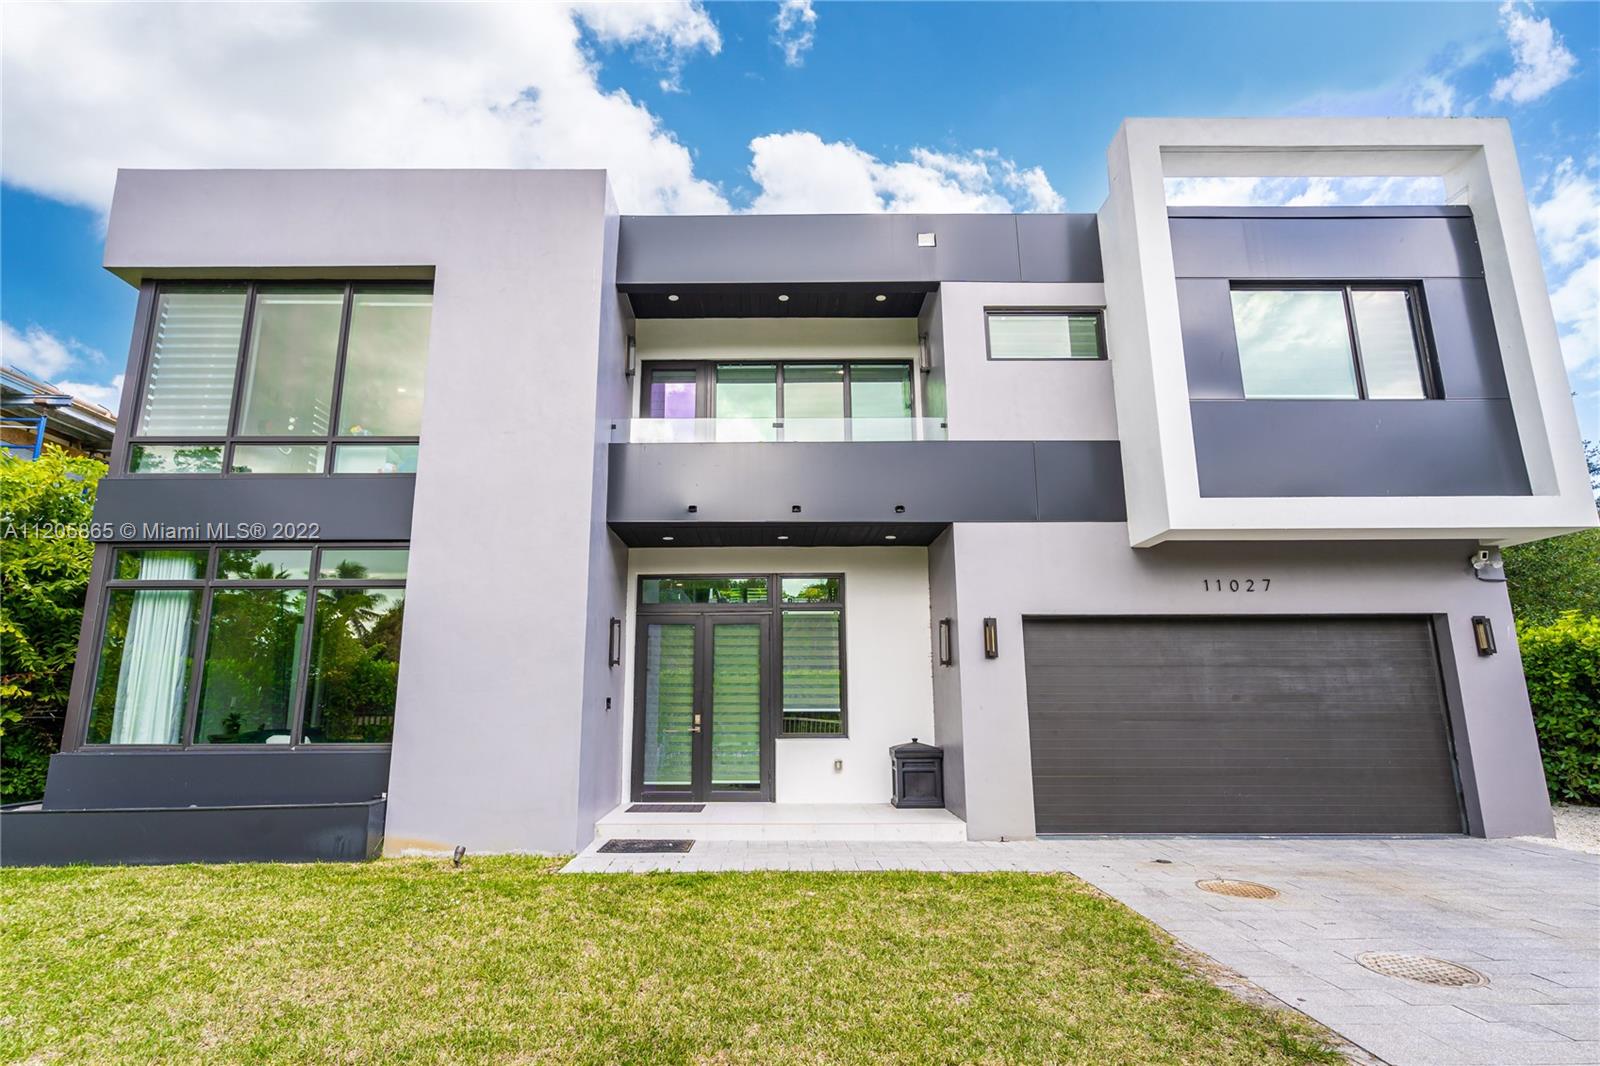 This beautiful, modern, and luxurious two-story home is located in Pinecrest and only two blocks away from US-1 and minutes away from the Palmetto and Dadeland mall. The downstairs area boasts an open floor plan that welcomes guest and family alike to the comforts of your home.  This 5-bedroom, 4.5-bathroom gated estate has 1 master, 2 suites and 2 bedrooms that share a Jack & Jill bathroom.  The house was built following modern designs and includes wooden accents that cozy up the home.  It also includes, a laundry room, 3 open terraces, an outdoor kitchen, a concrete flat roof, a gated rectangular pool, and turf play area.
Cash offers need to include proof of funds and all others offers need to be accompanied by a pre-approval letter.